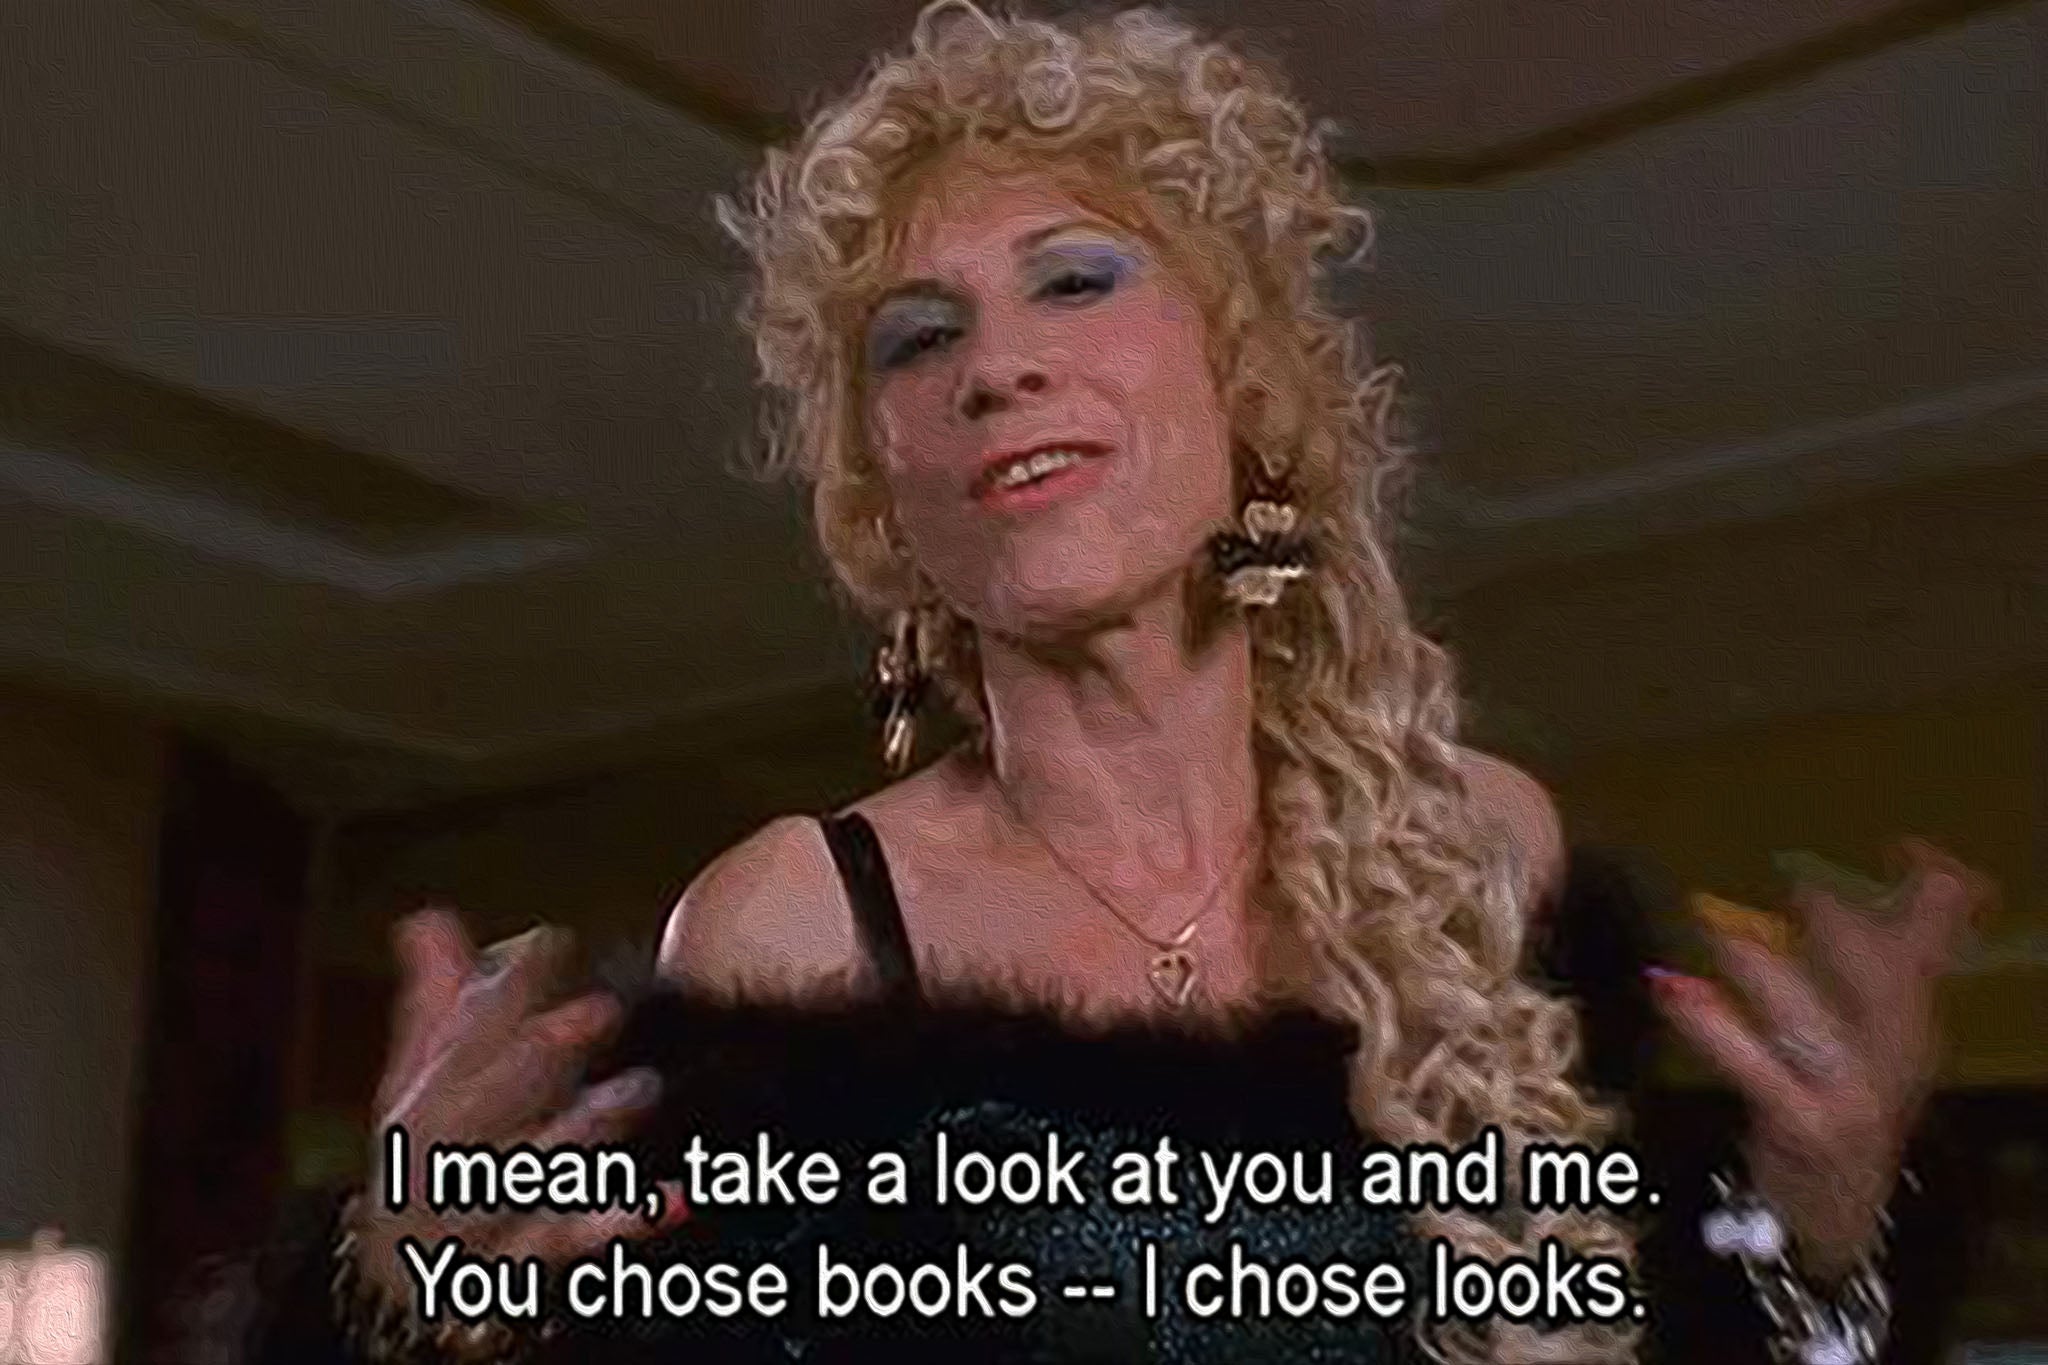 Rhea Perlman’s withering stance on reading in the 1996 Roald Dahl adaptation ‘Matilda’